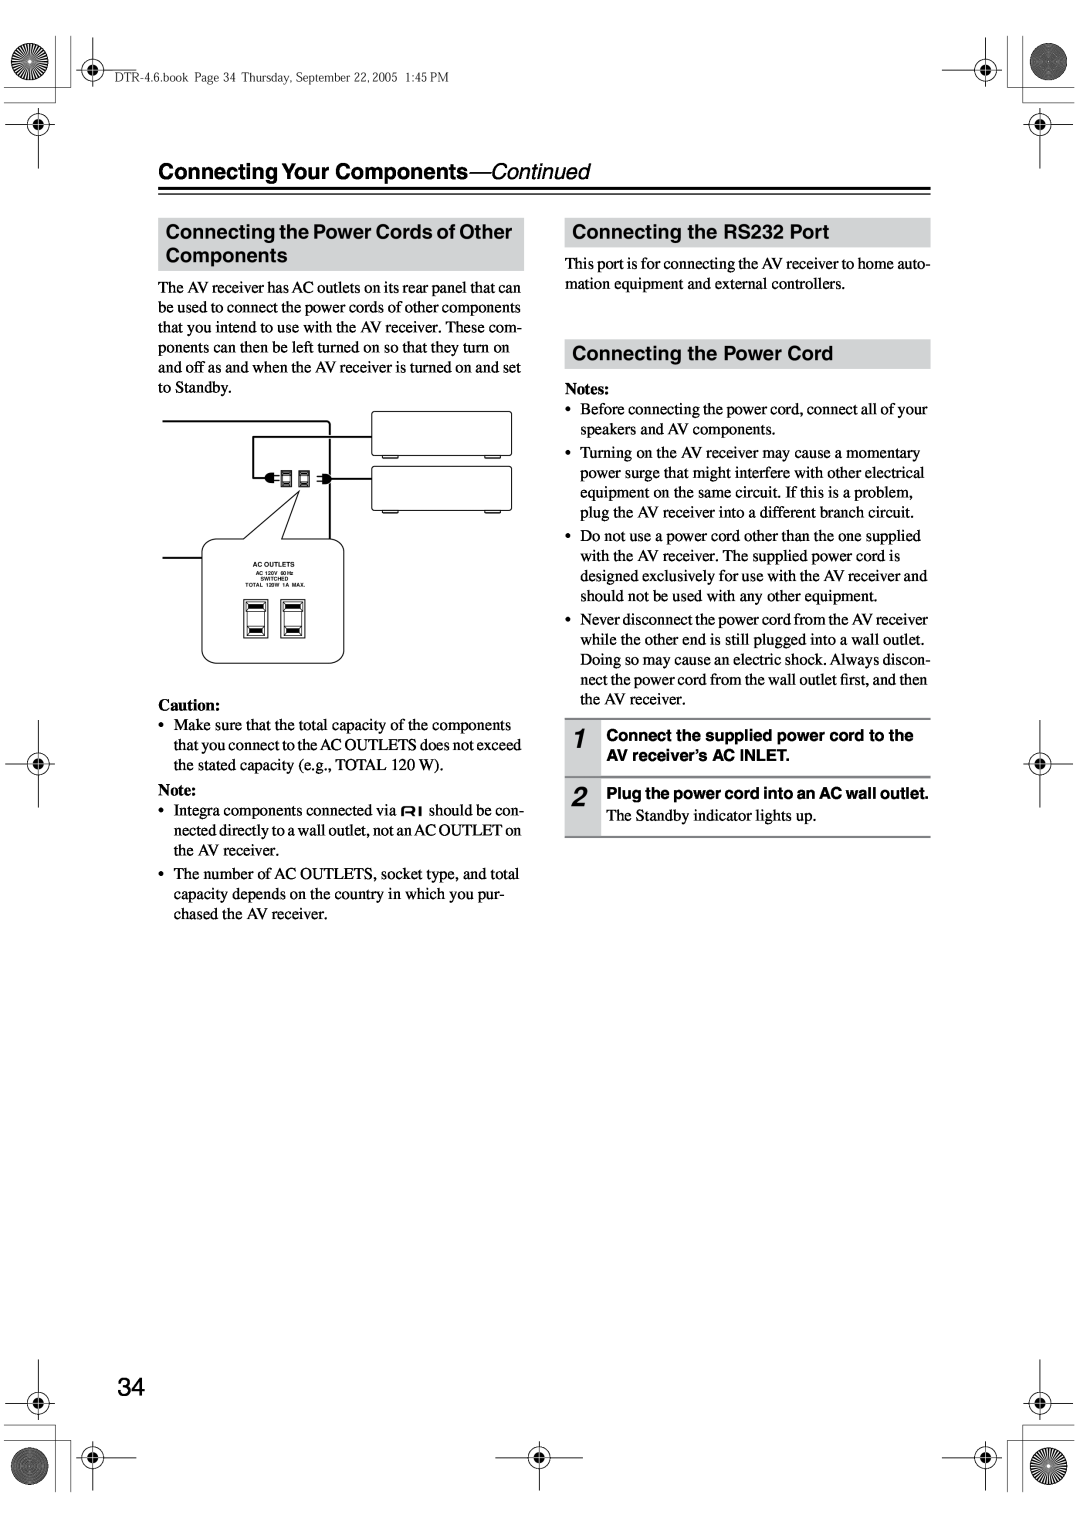 Integra DTR-4.6 instruction manual Connecting the Power Cords of Other Components, Connecting the RS232 Port, Notes 